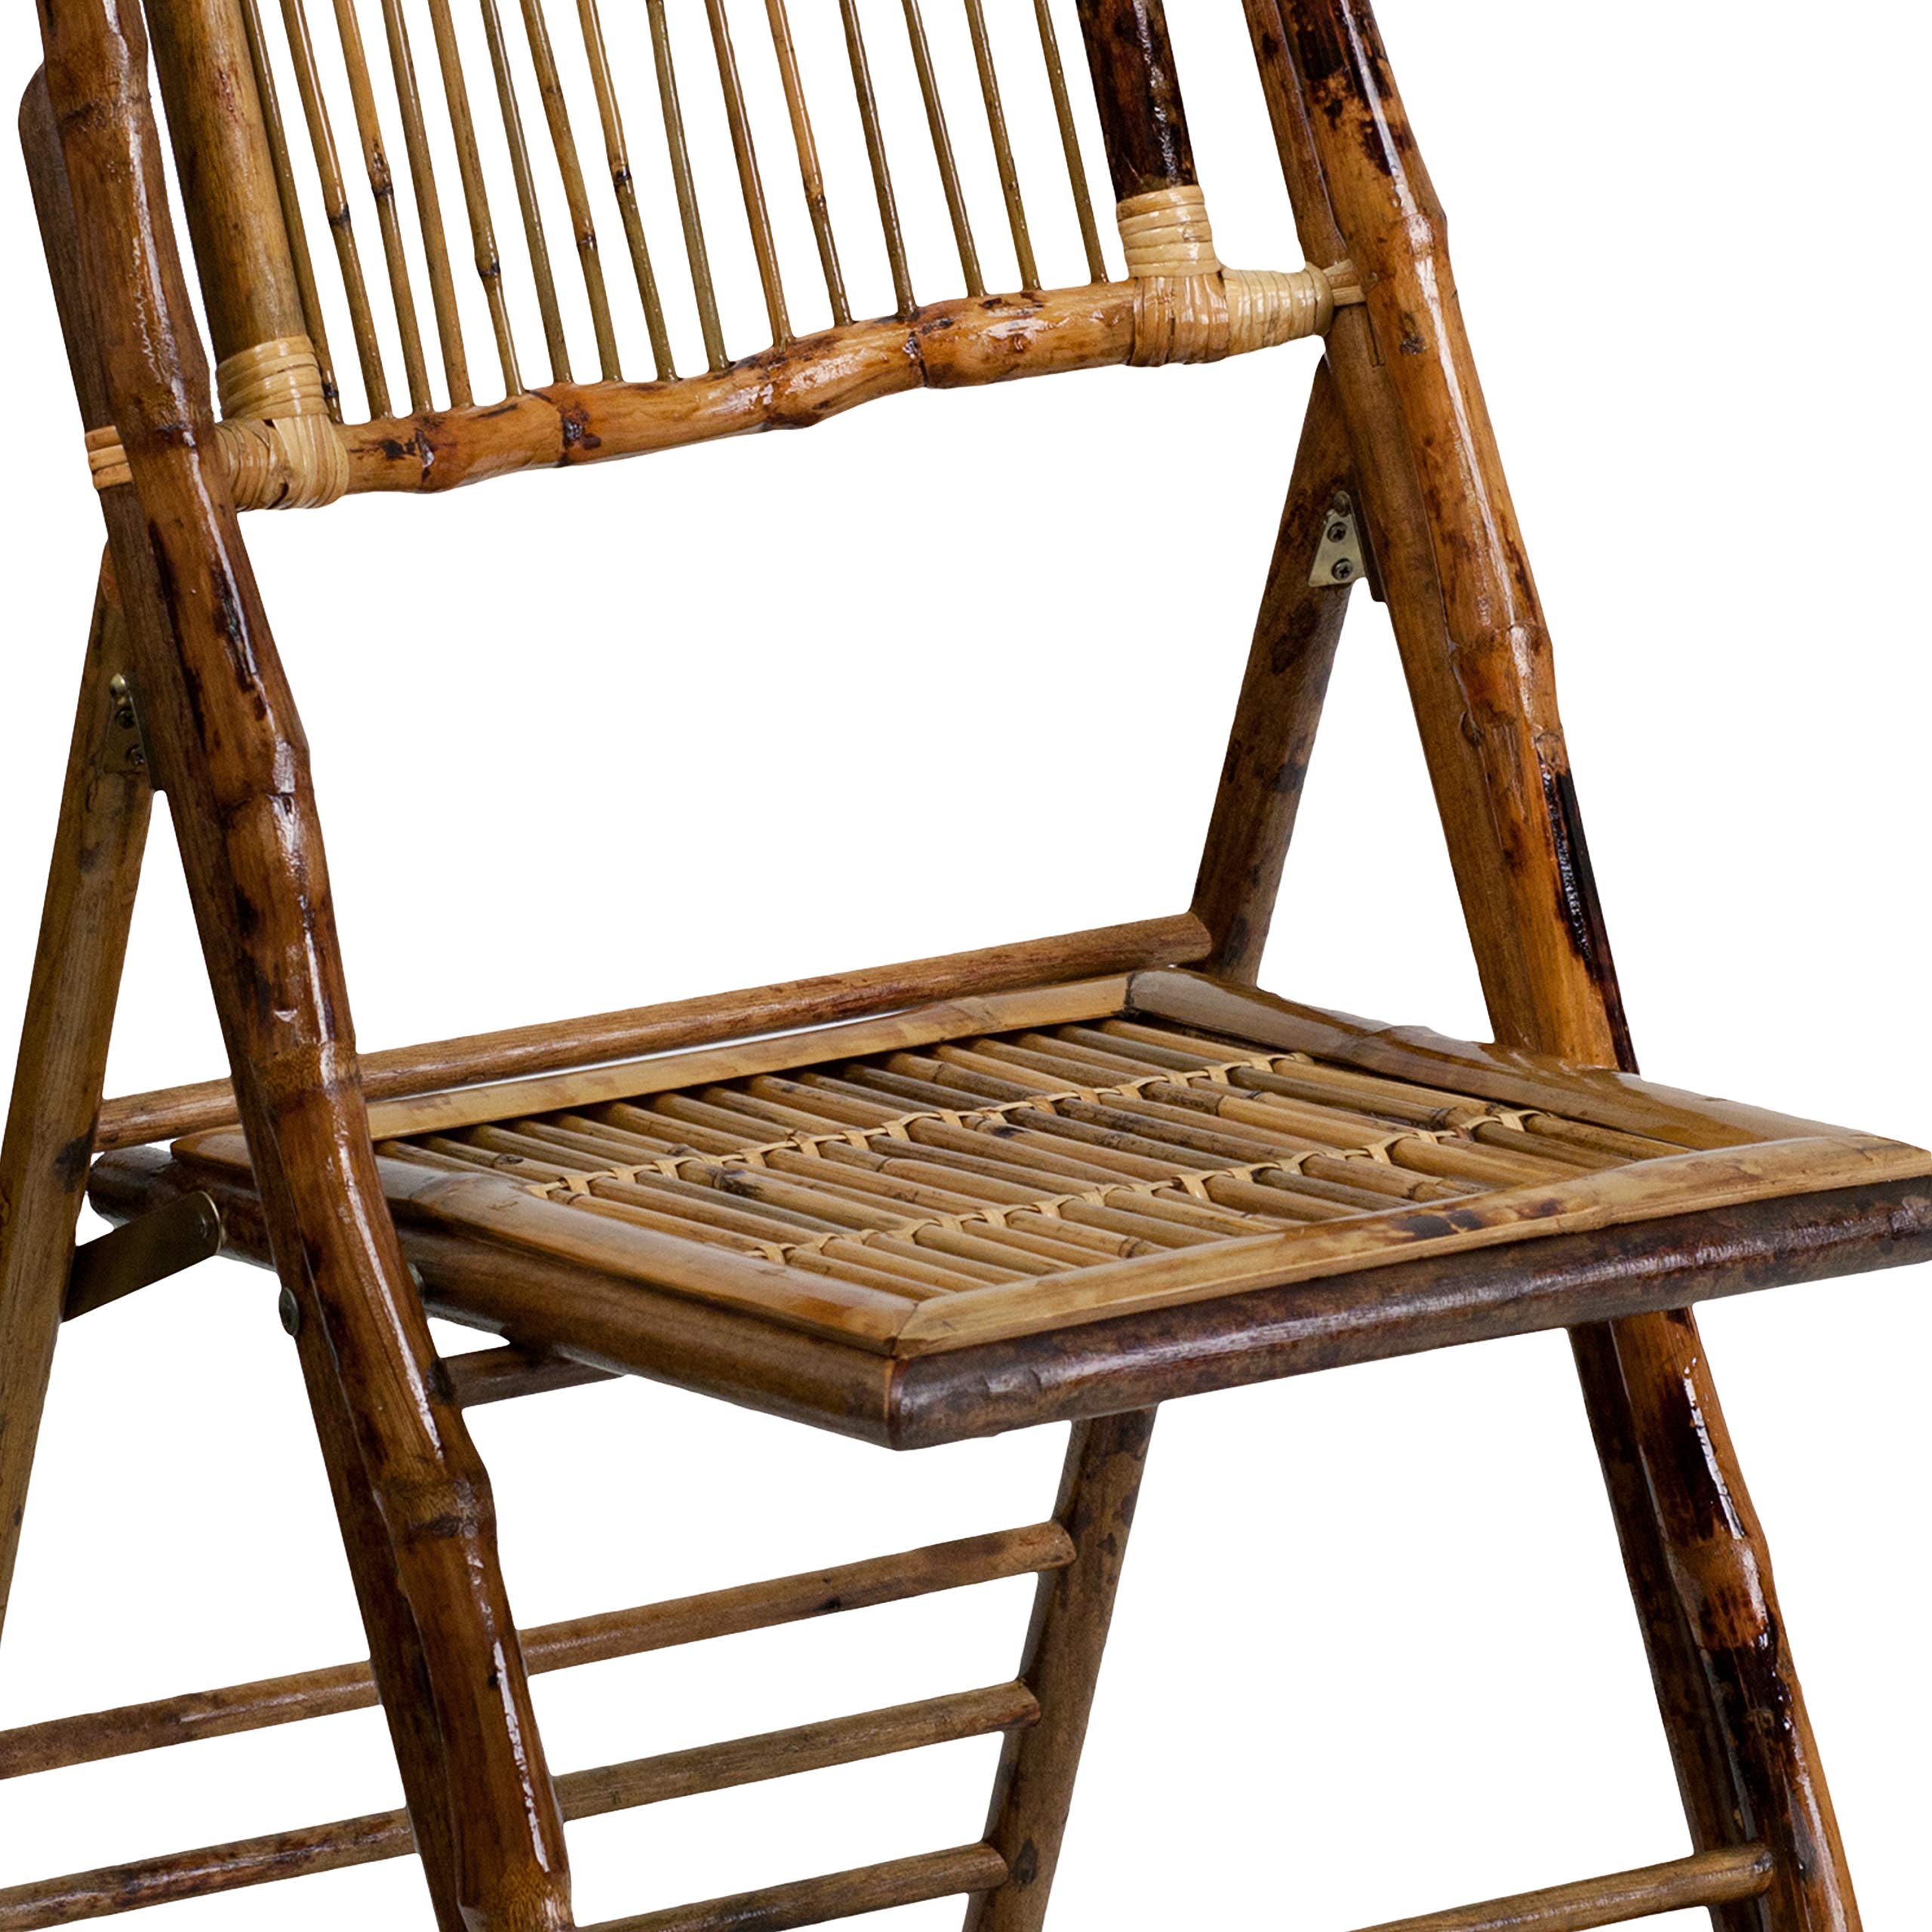 EMMA + OLIVER 2 Pack Commercial Event Party Rental Bamboo Folding Chair